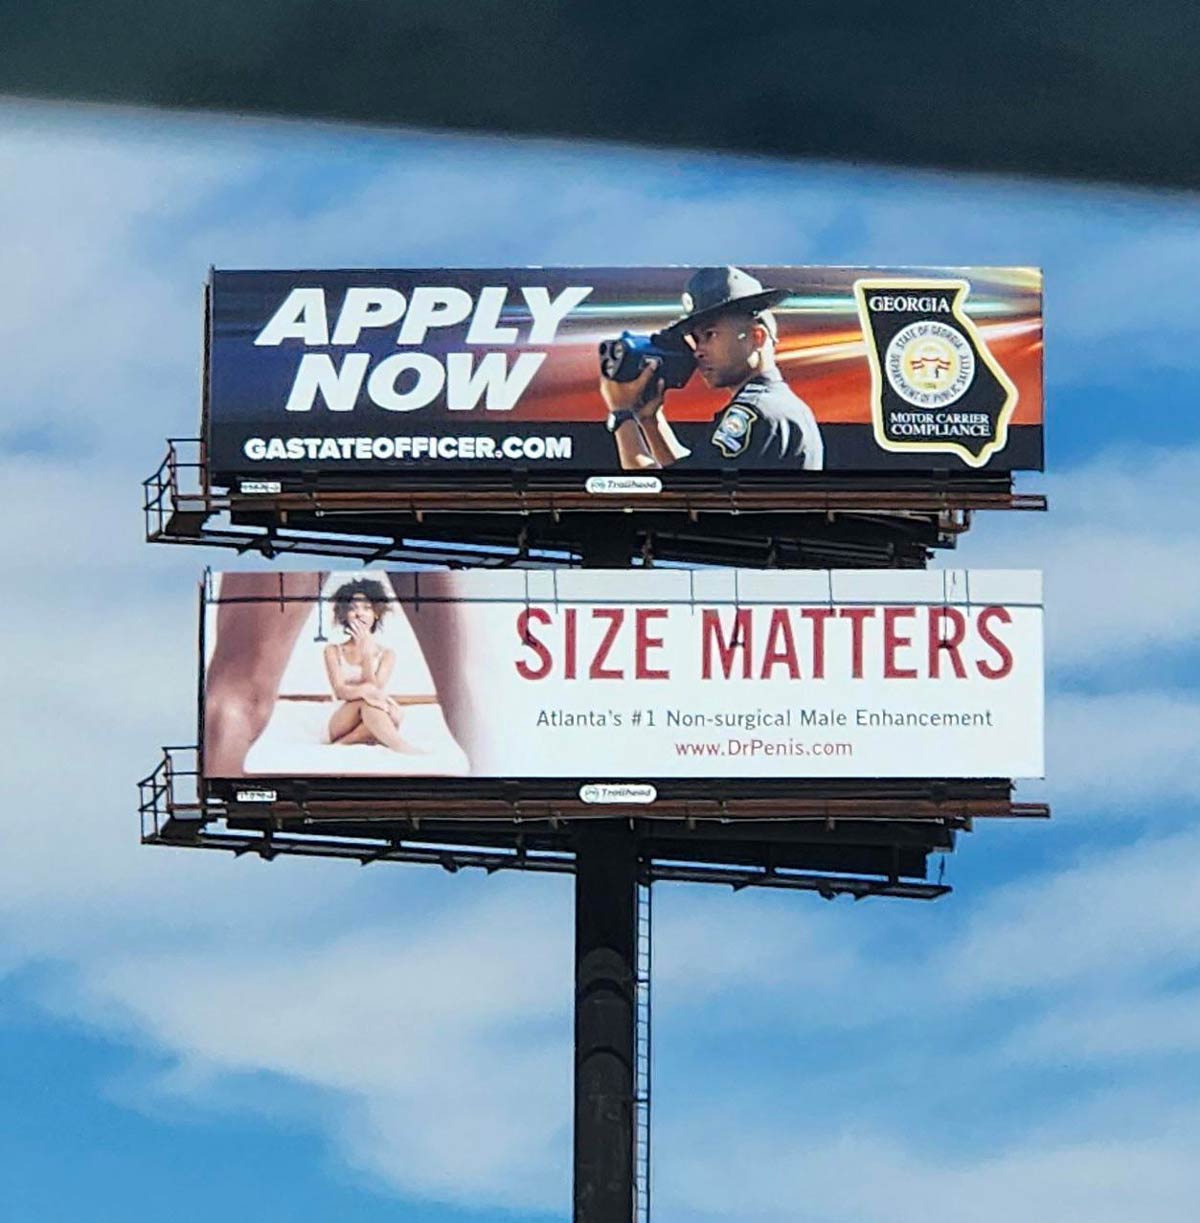 Be a state trooper AND increase your penis size!